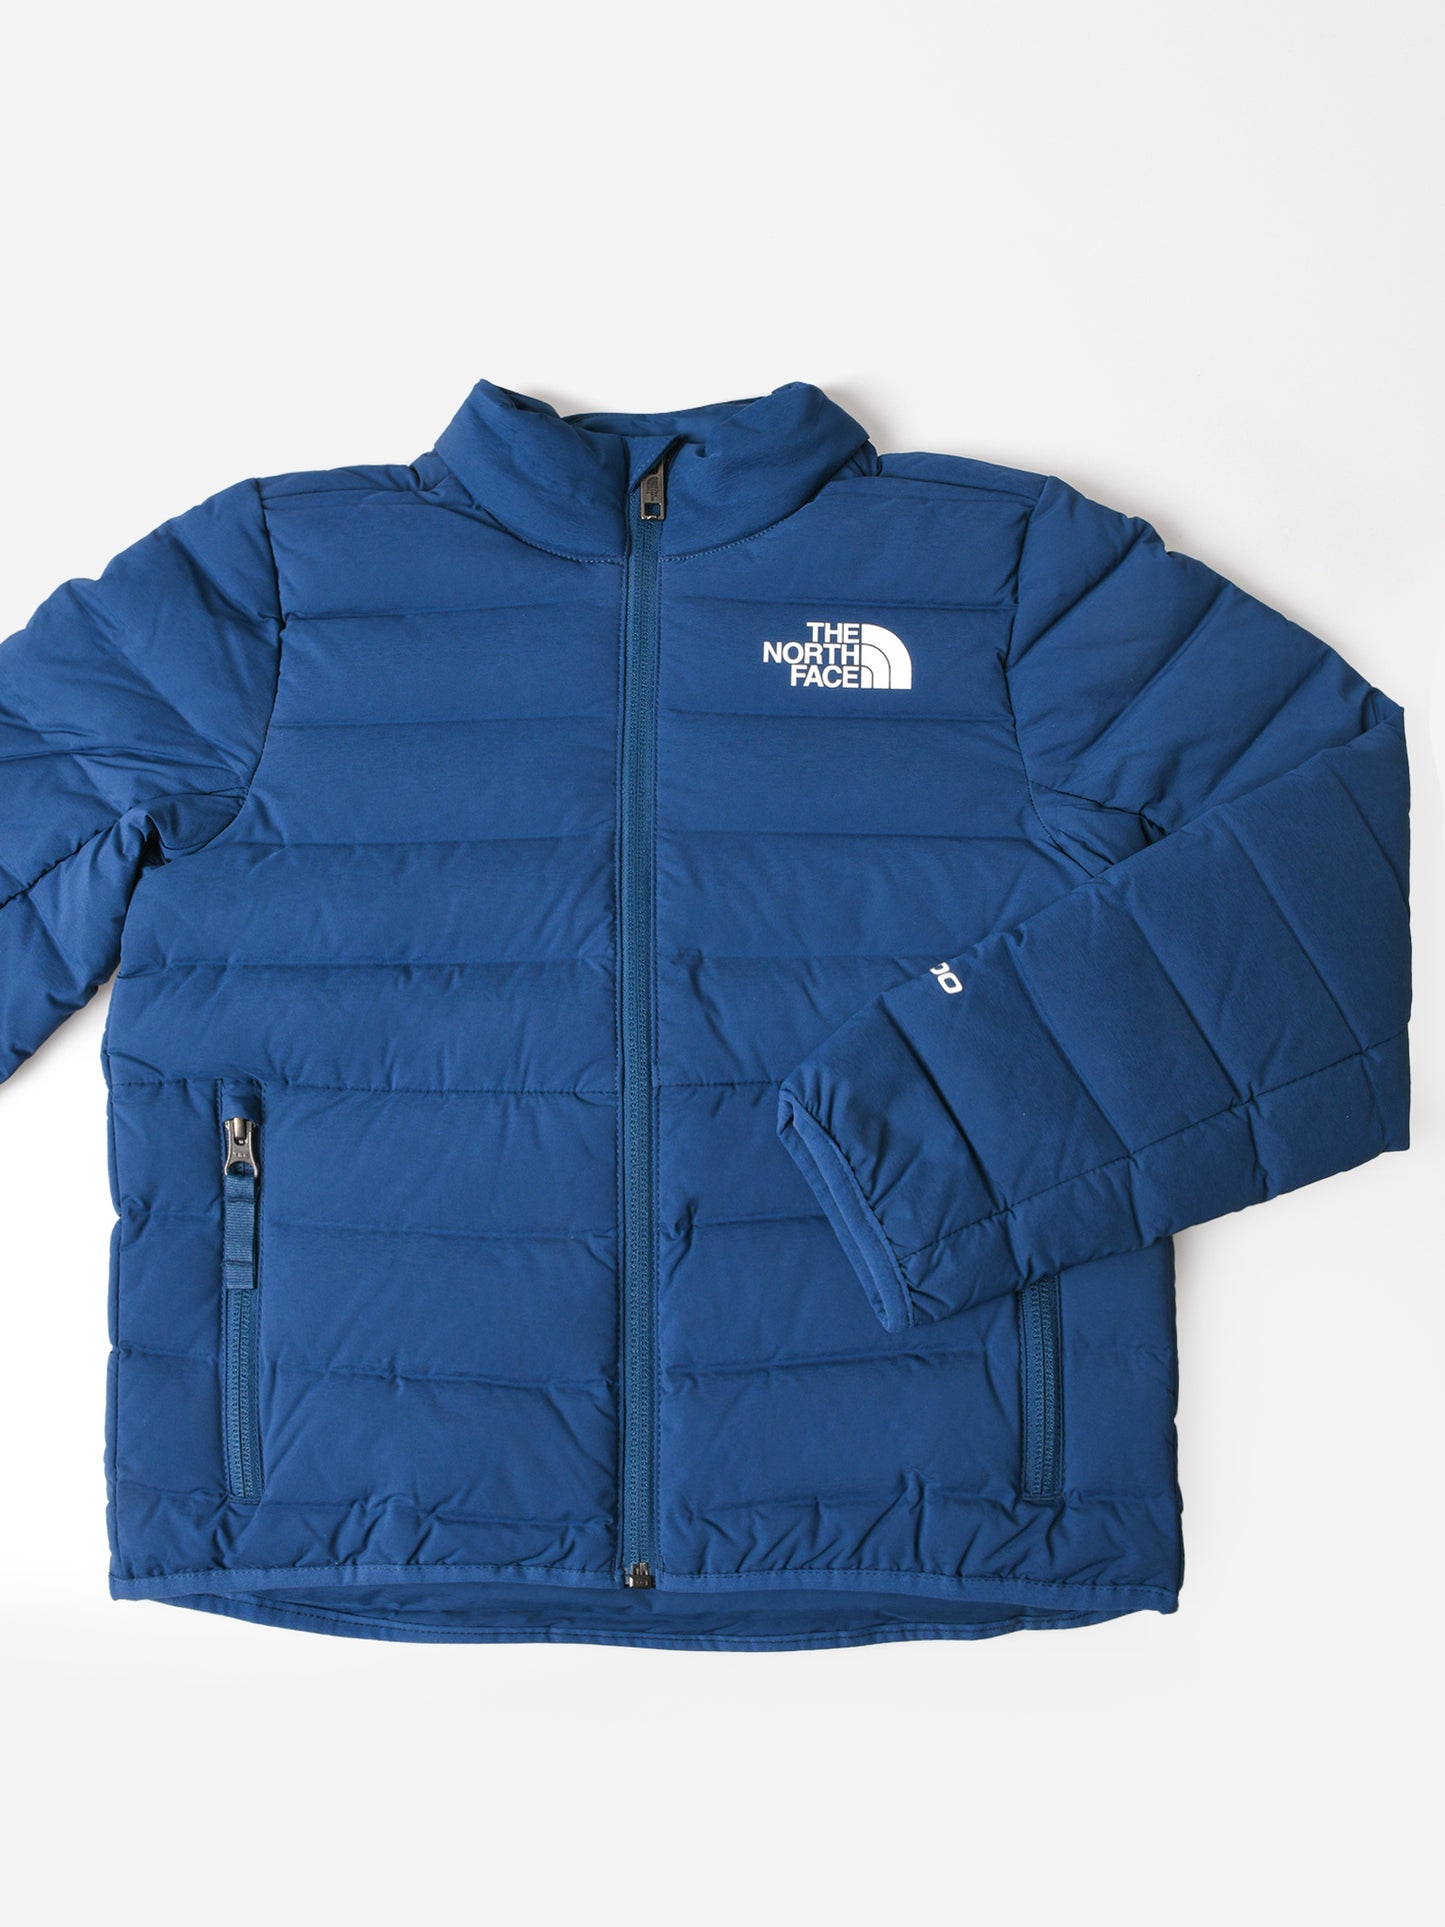 The North Face Boys’ Belleview Stretch Down Jacket